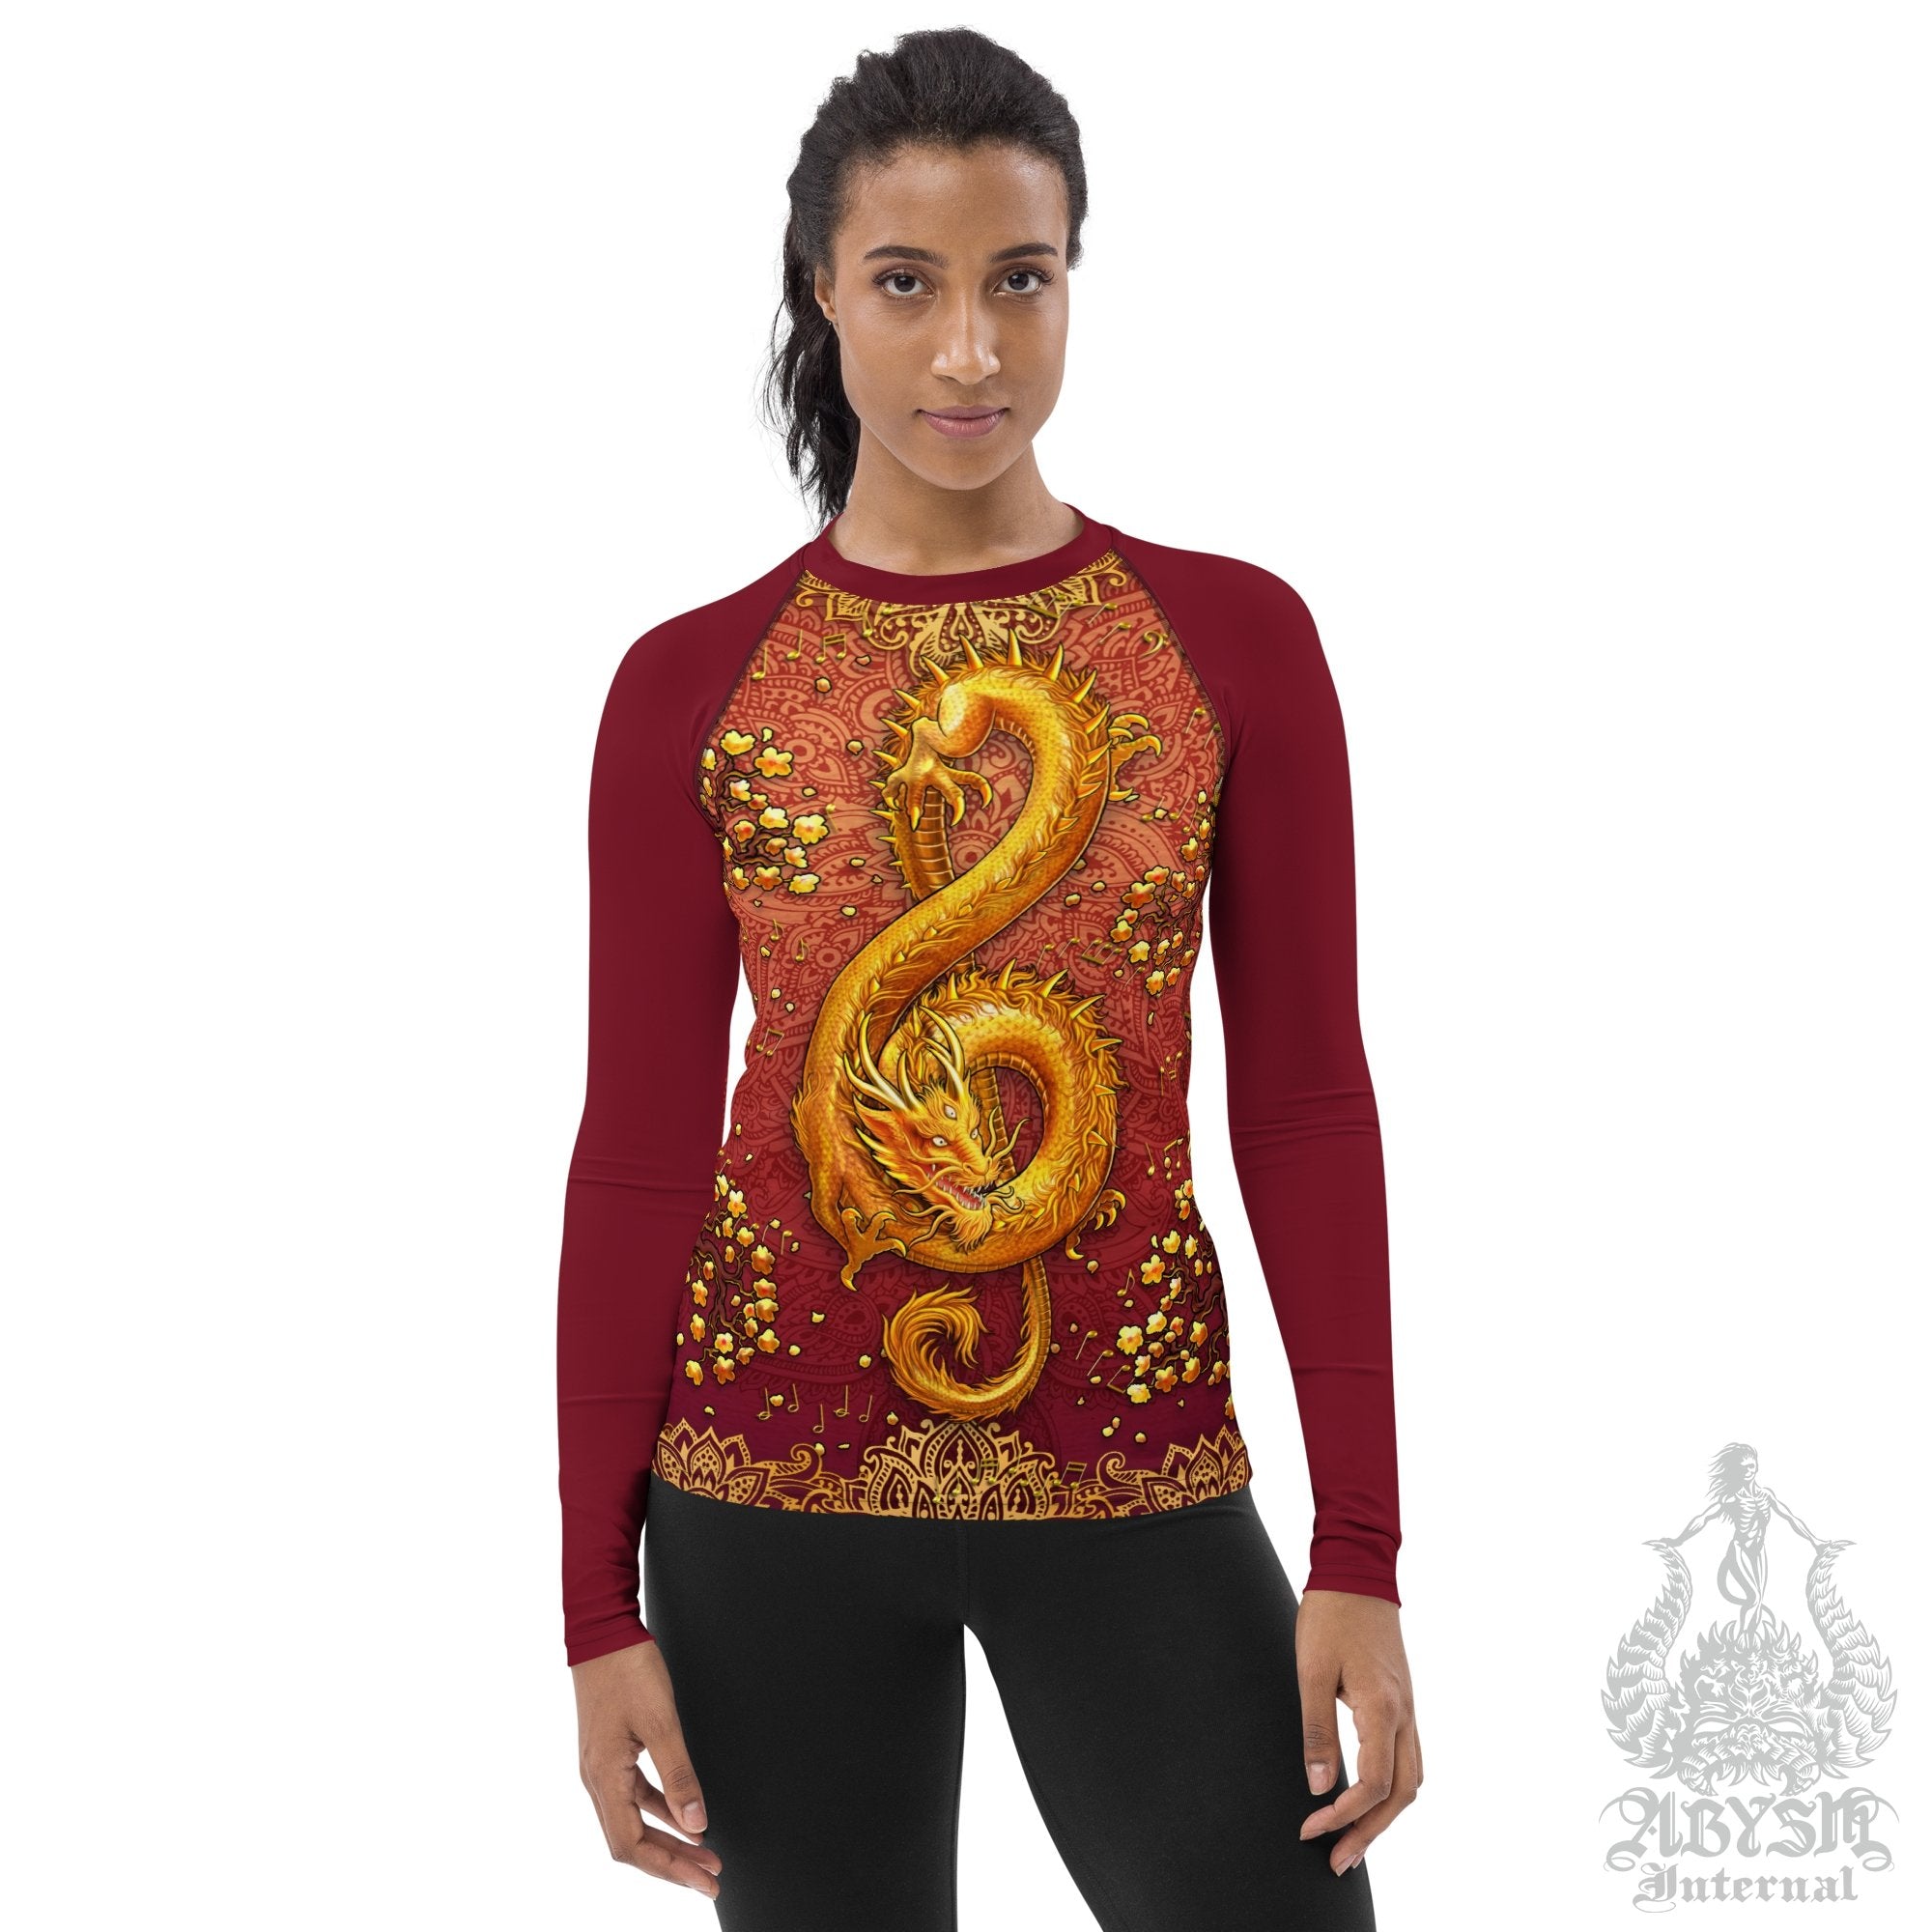 Gold Dragon Rash Guard for Women, Long Sleeve spandex shirt for surfing, swimsuit top for water sports, Fantasy Art - Boho Music - Abysm Internal